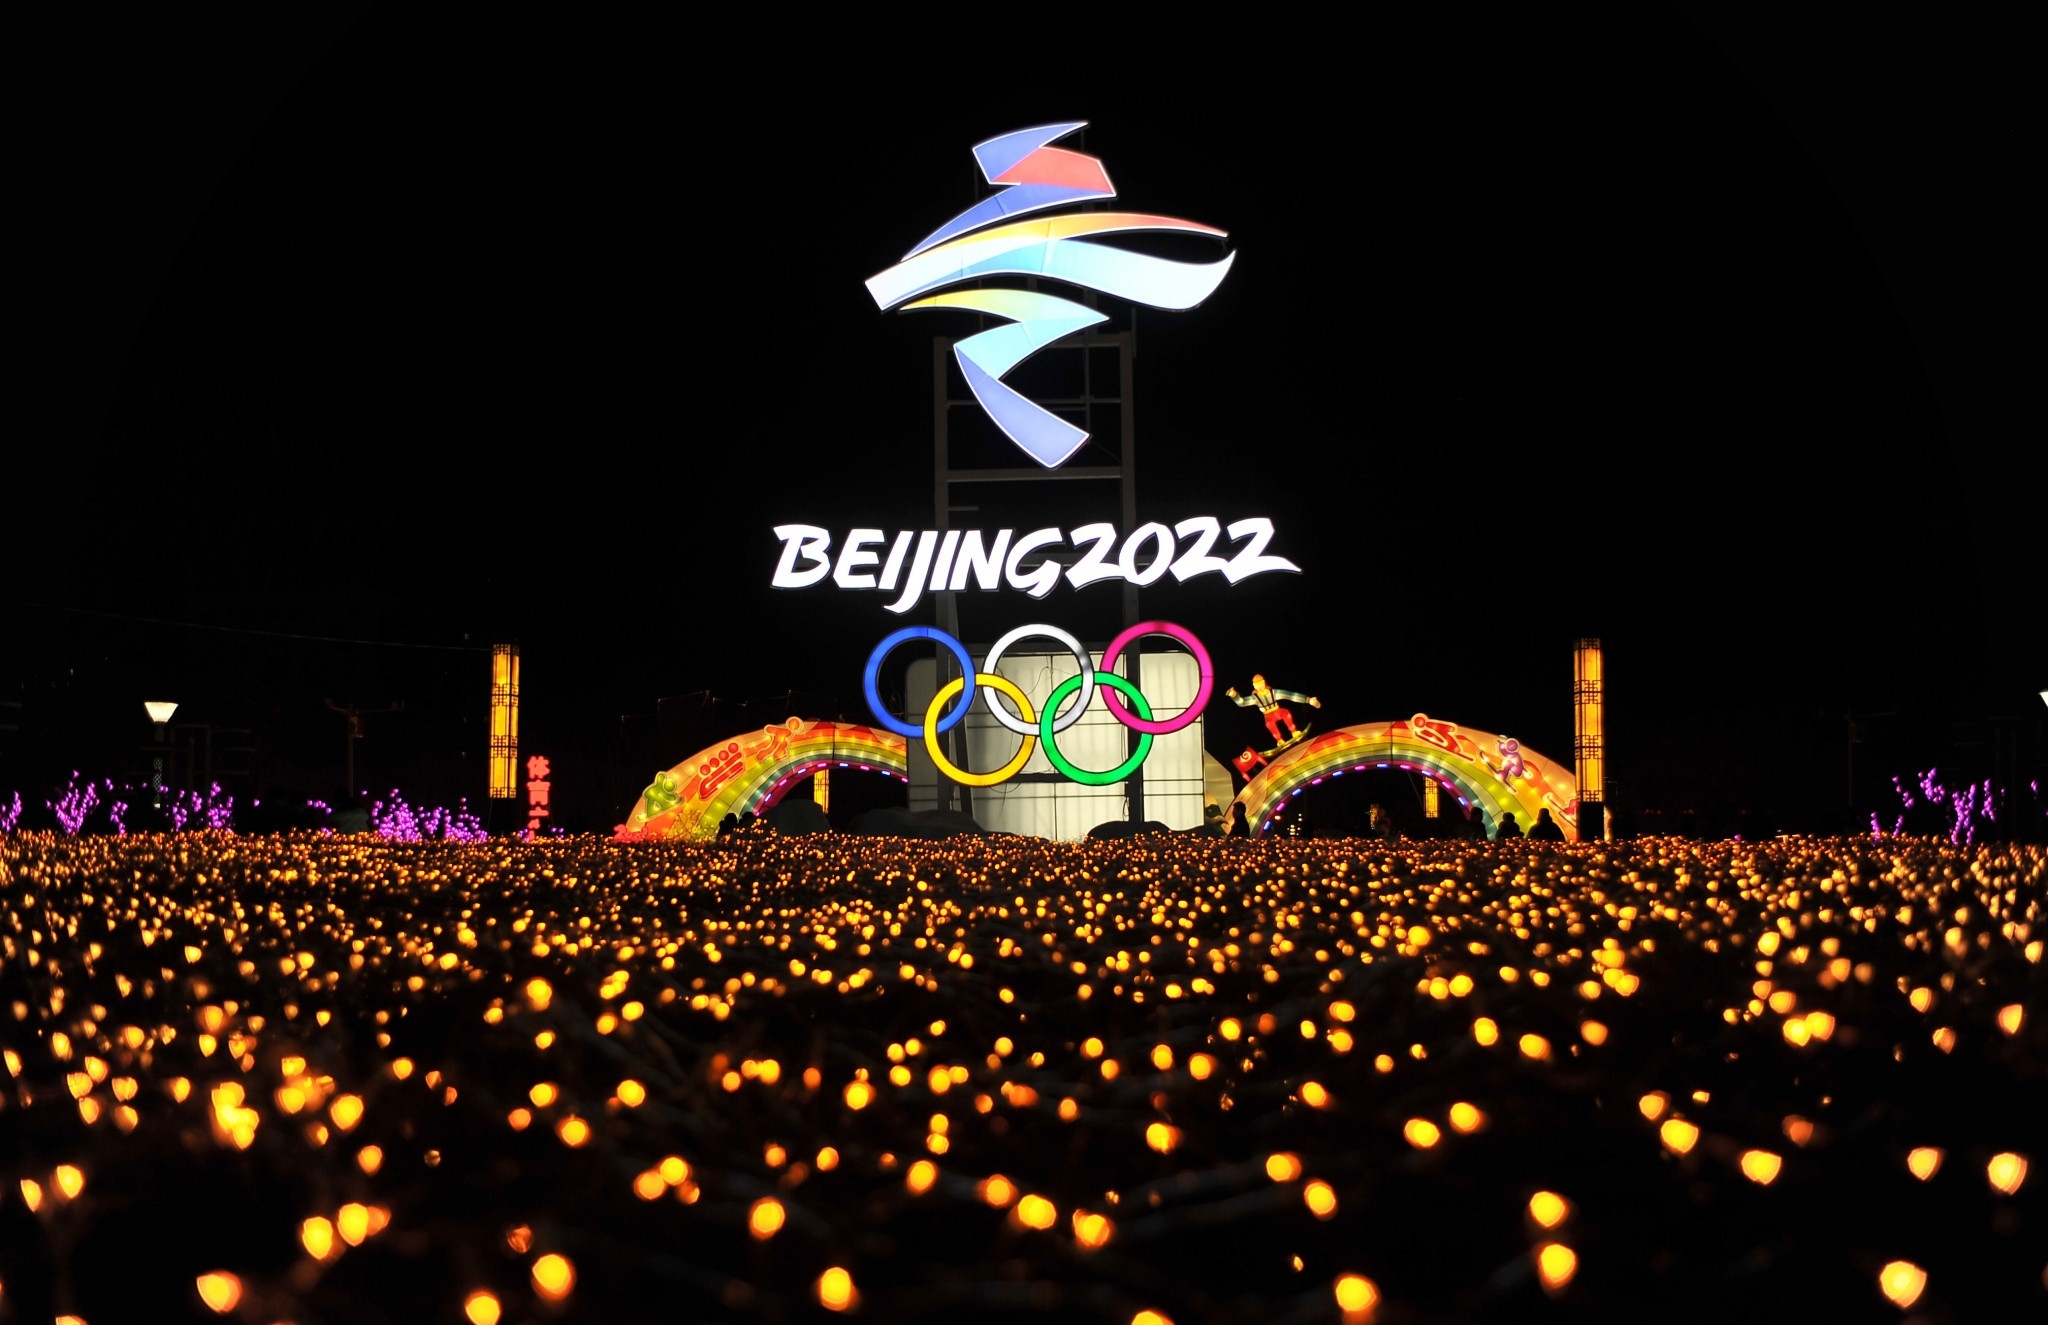 China Aiming To Launch Digital Currency In Time For Beijing 2022 Winter Olympics How Long Until December 2022